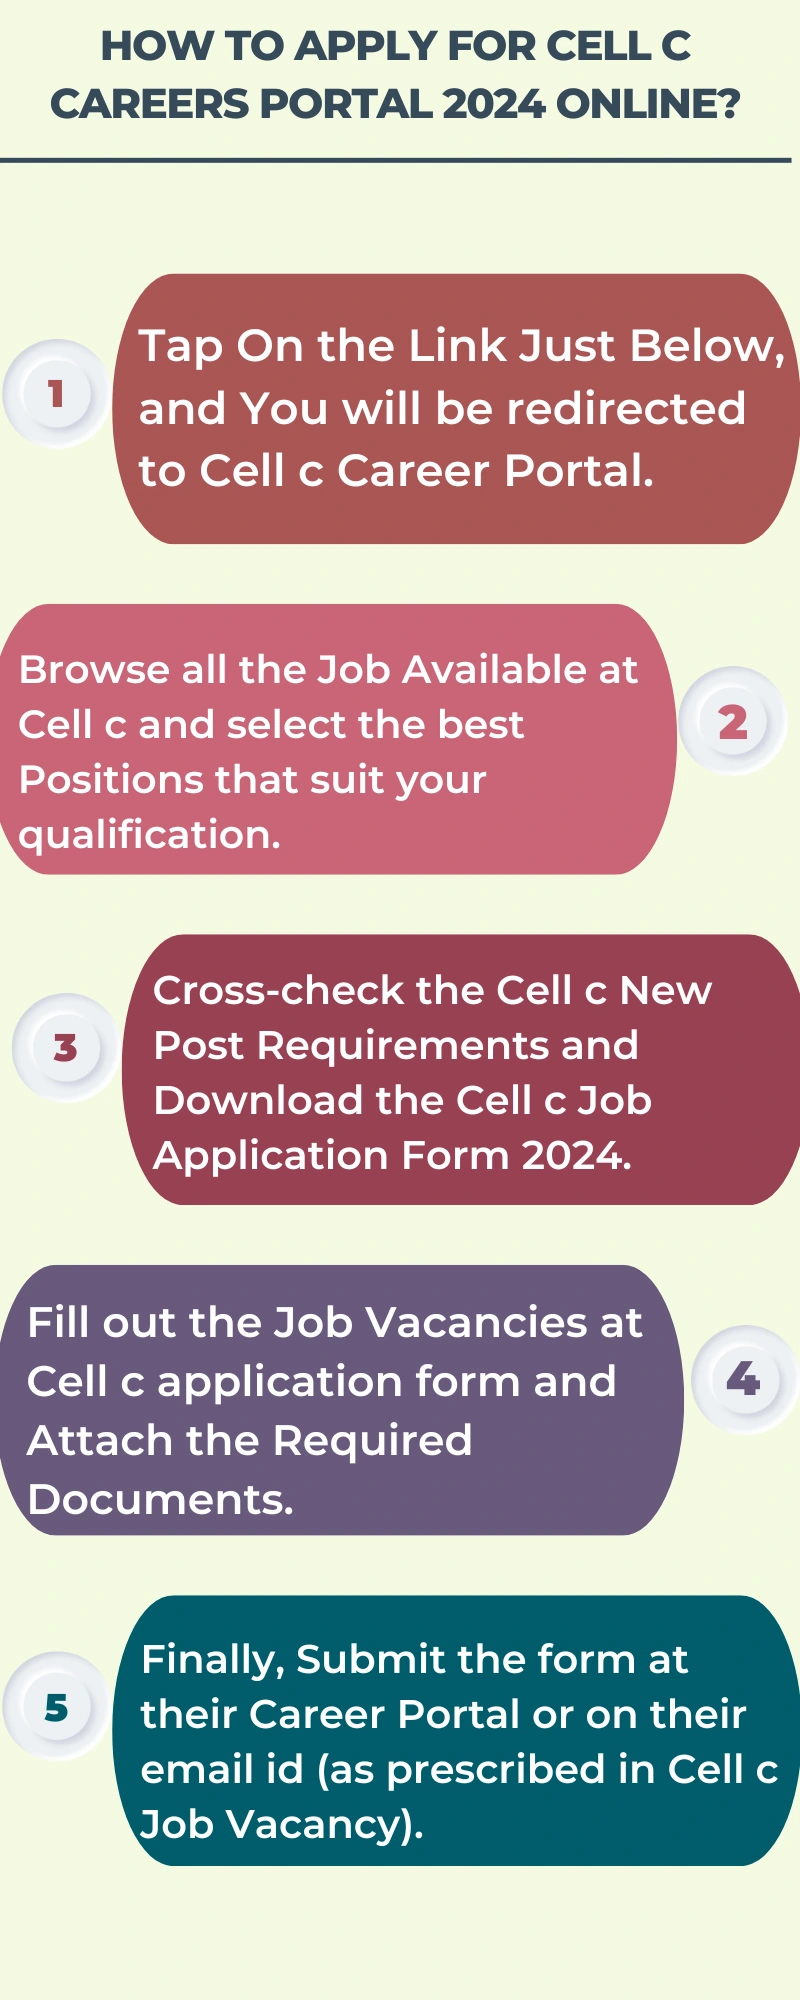 How To Apply for Cell c Careers Portal 2024 Online?